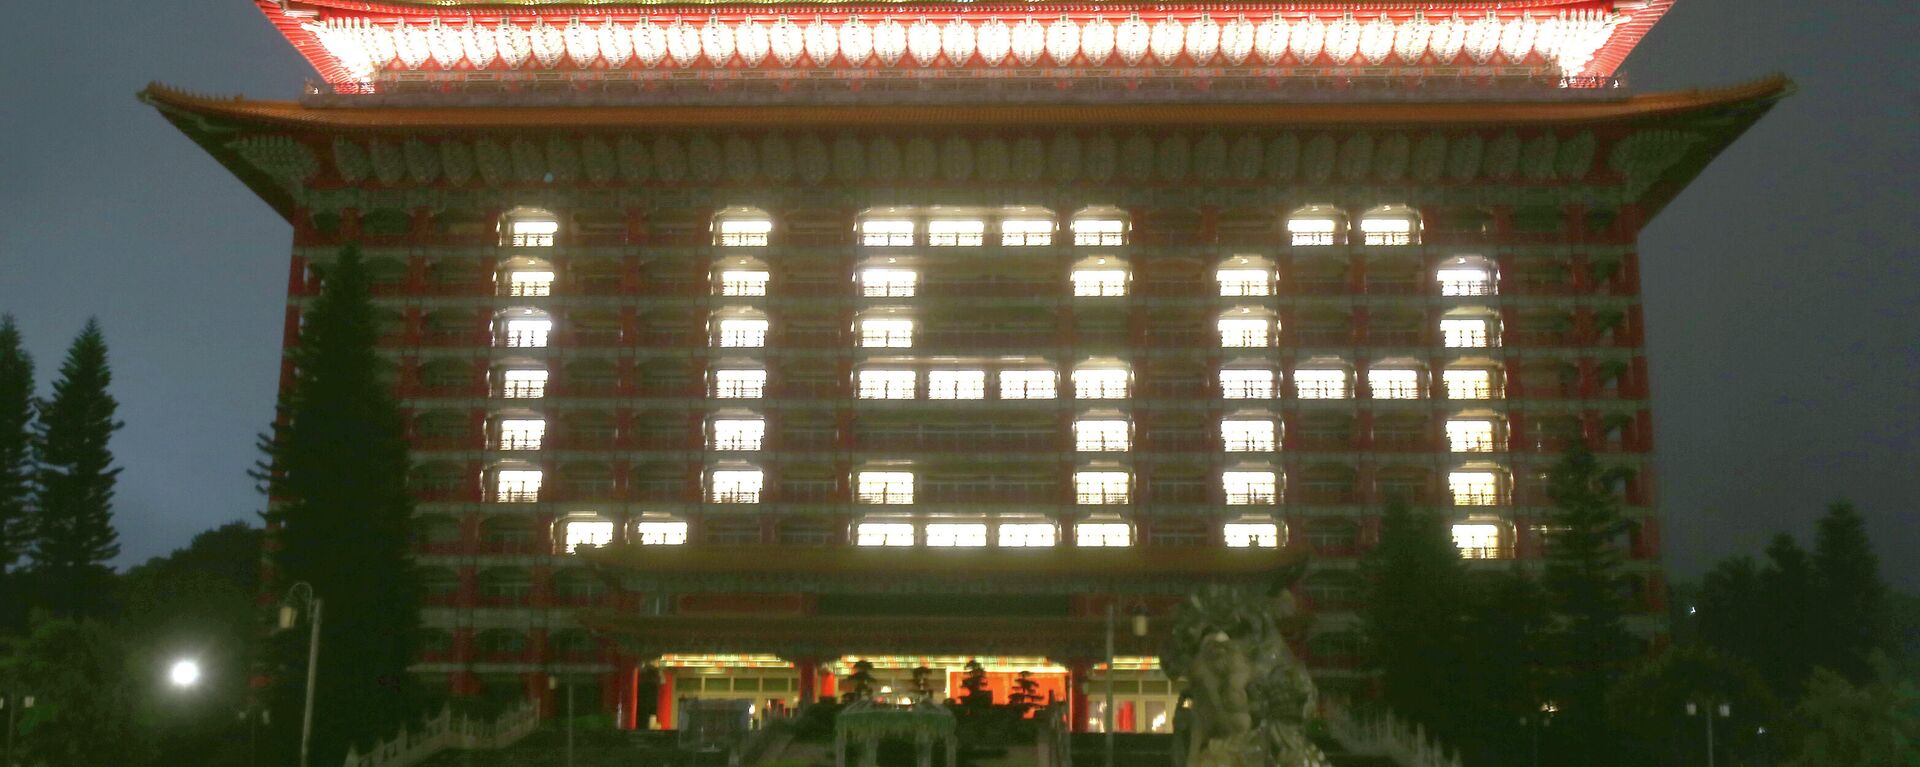 ''USA'' is formed by lighting on the Taipei Grand Hotel, to thank the U.S. who will give Taiwan 750,000 doses of COVID-19 vaccine after the COVID-19 alert rose to level 3 , in Taipei, Taiwan, Sunday, June 6, 2021. Taiwan is desperate for vaccines after a sudden outbreak that started in late April caught authorities by surprise - Sputnik International, 1920, 26.05.2022